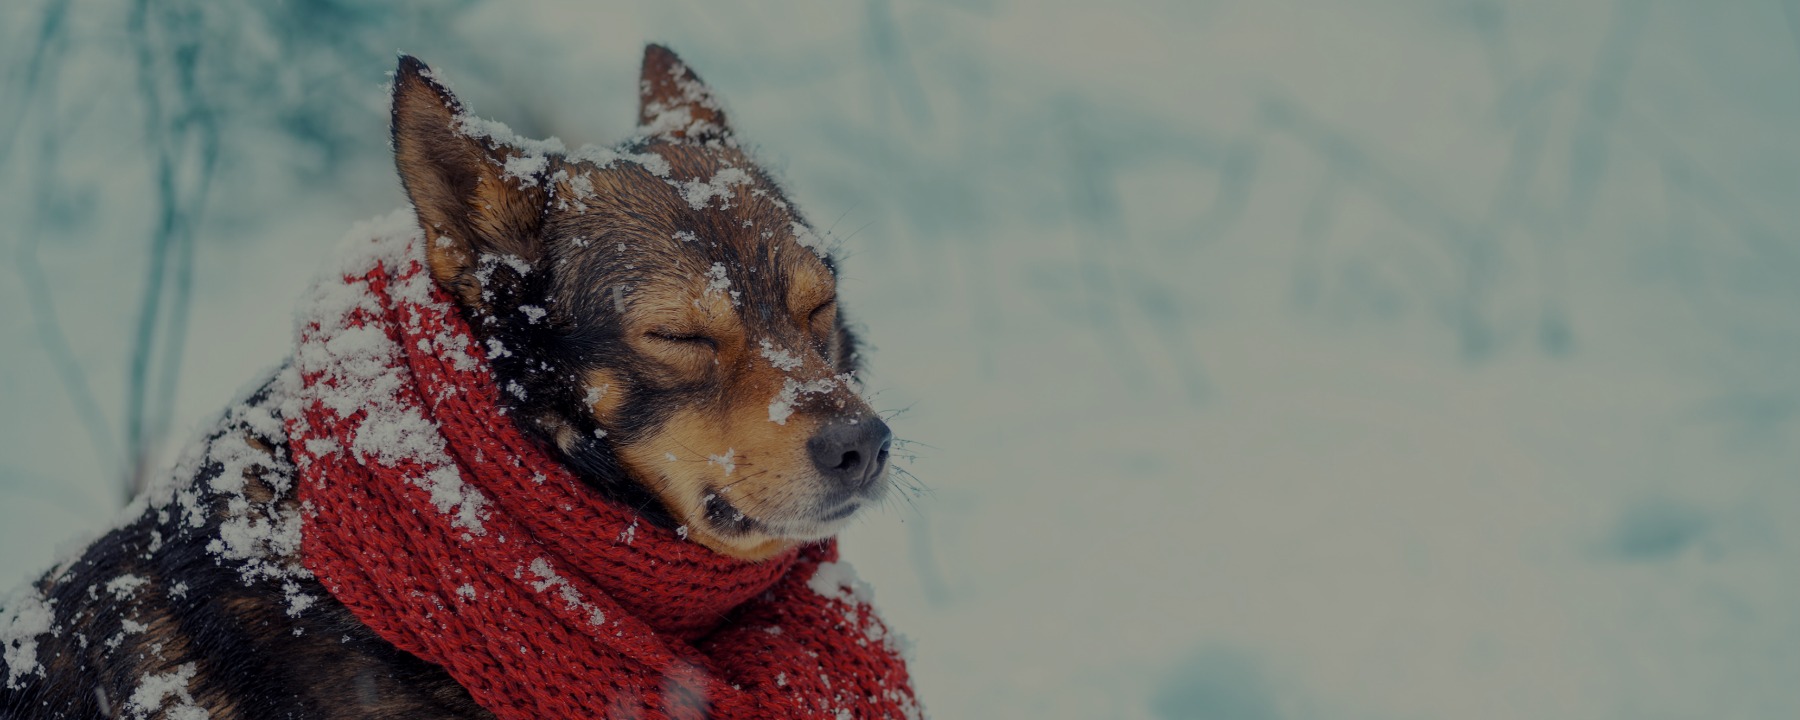 7 Ways to Keep Your Pet Warm This Winter